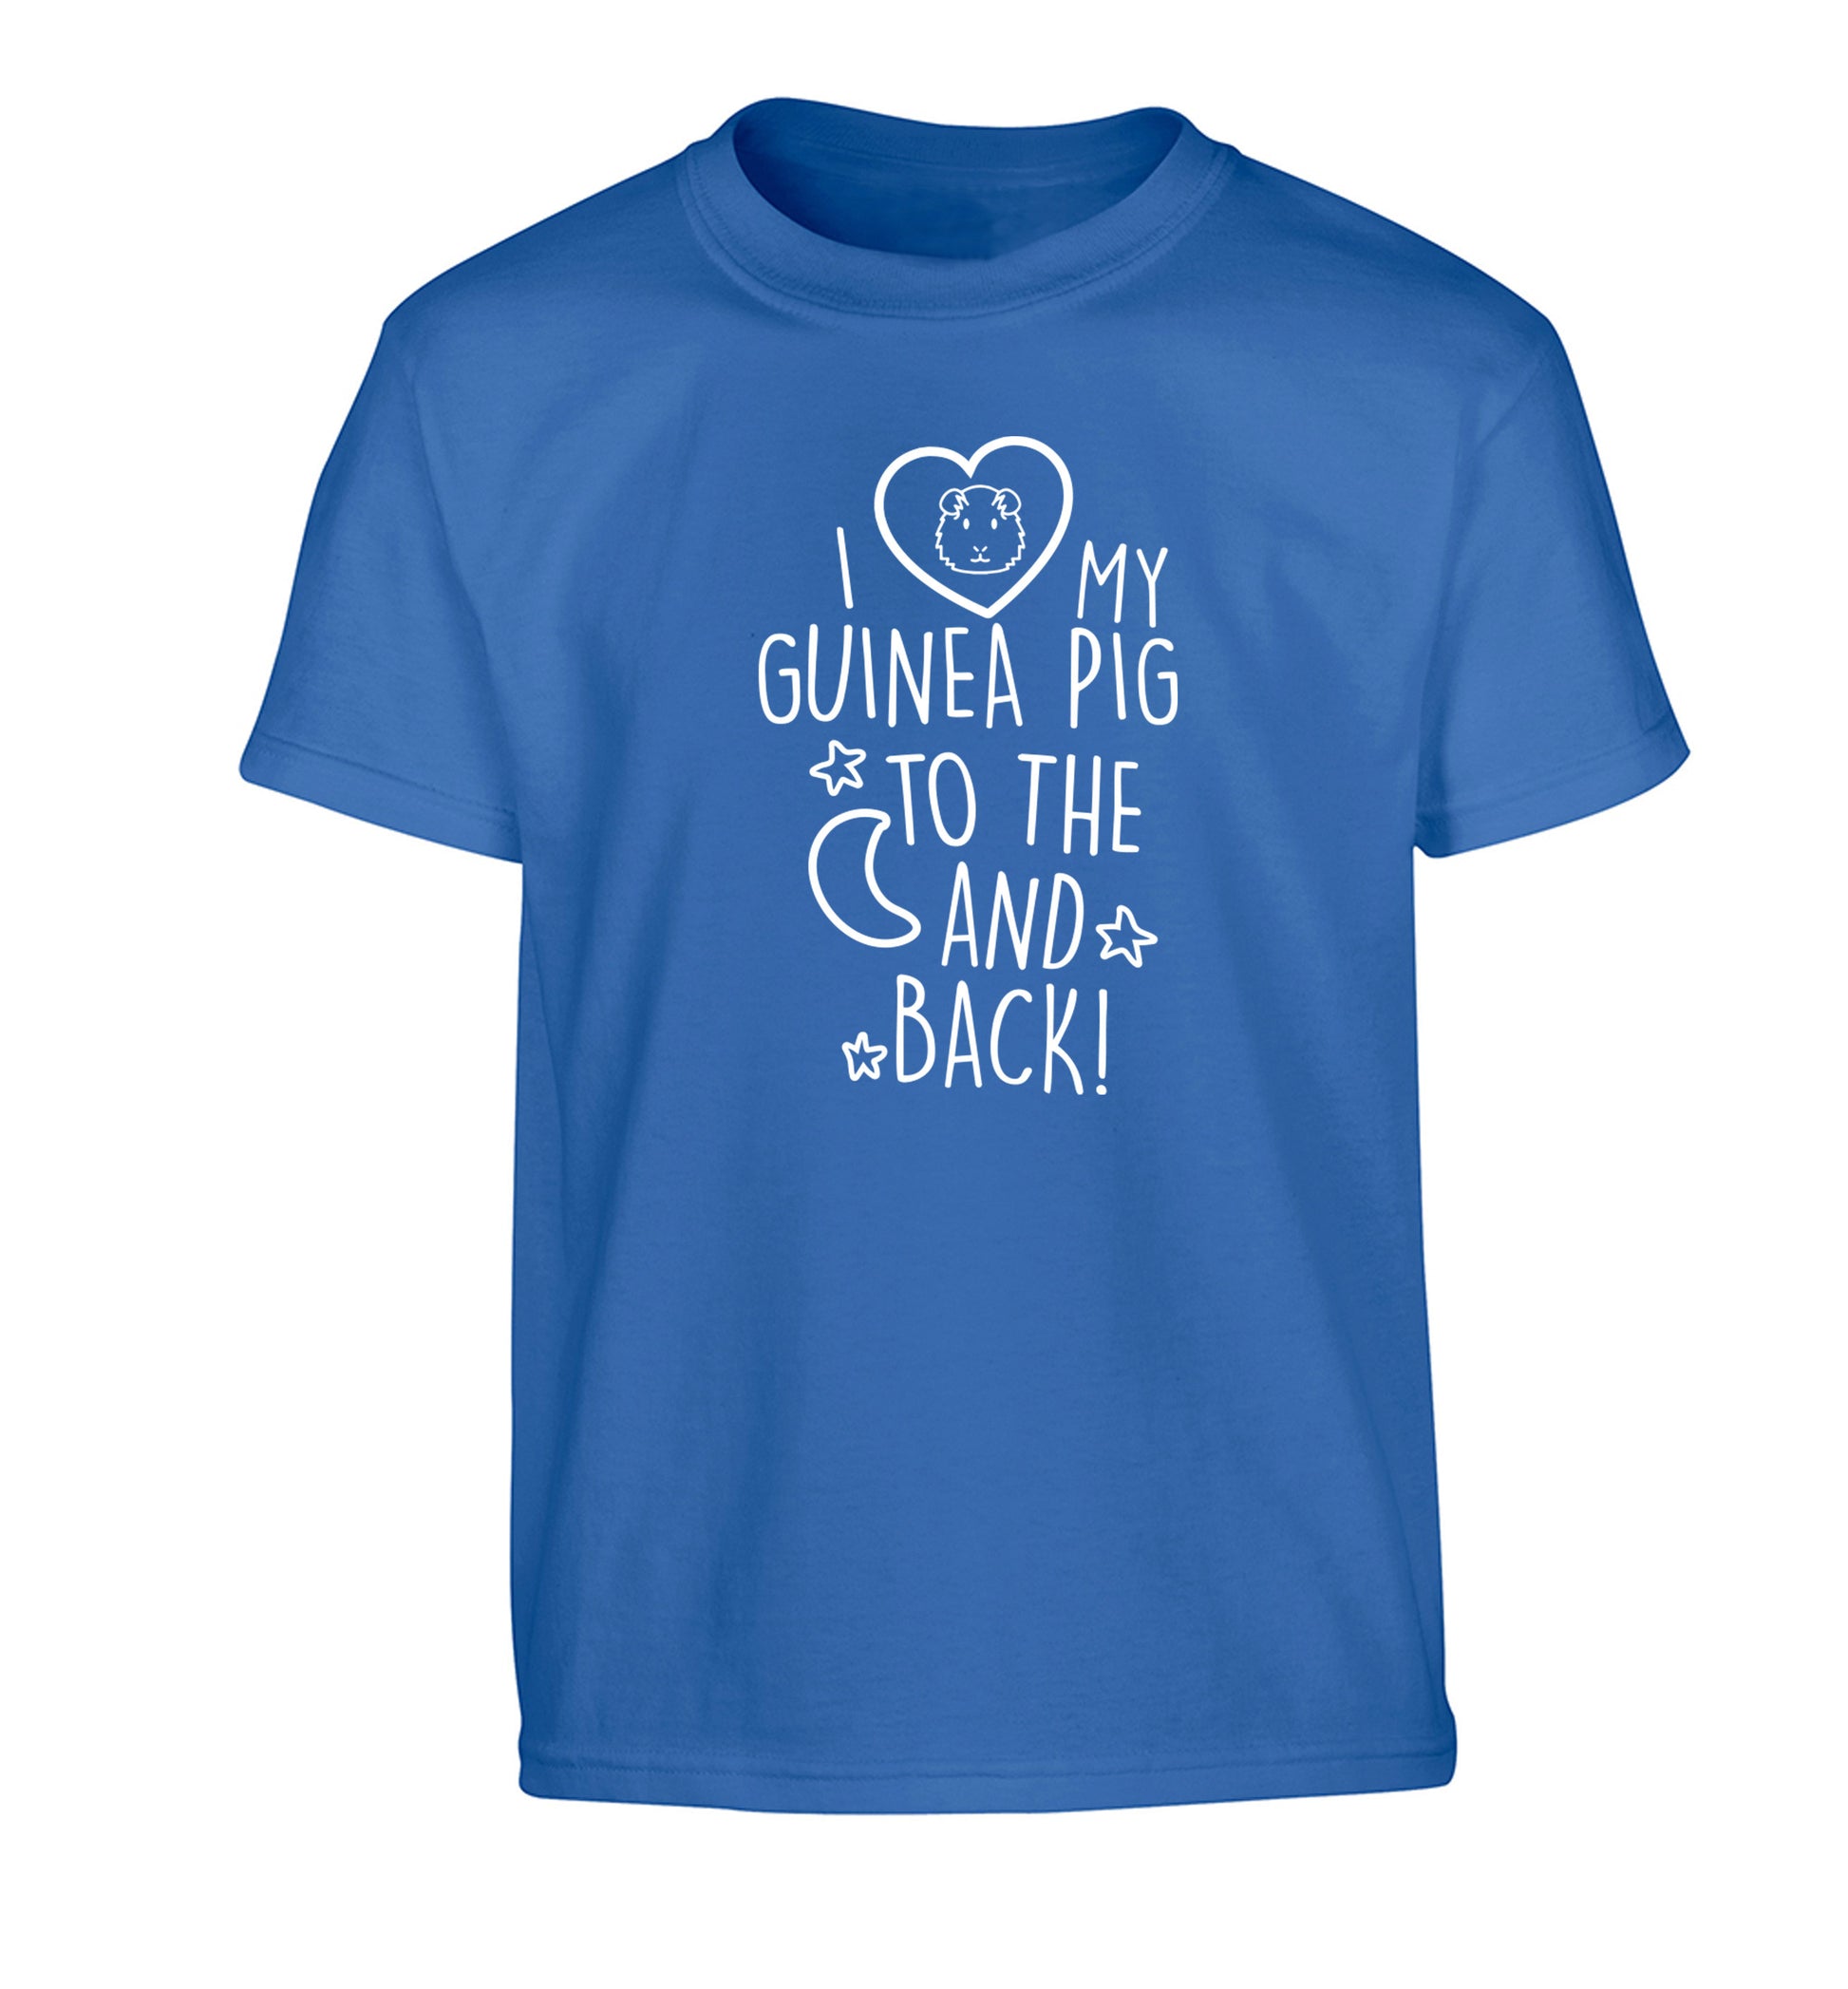 I love my guinea pig to the moon and back Children's blue Tshirt 12-14 Years